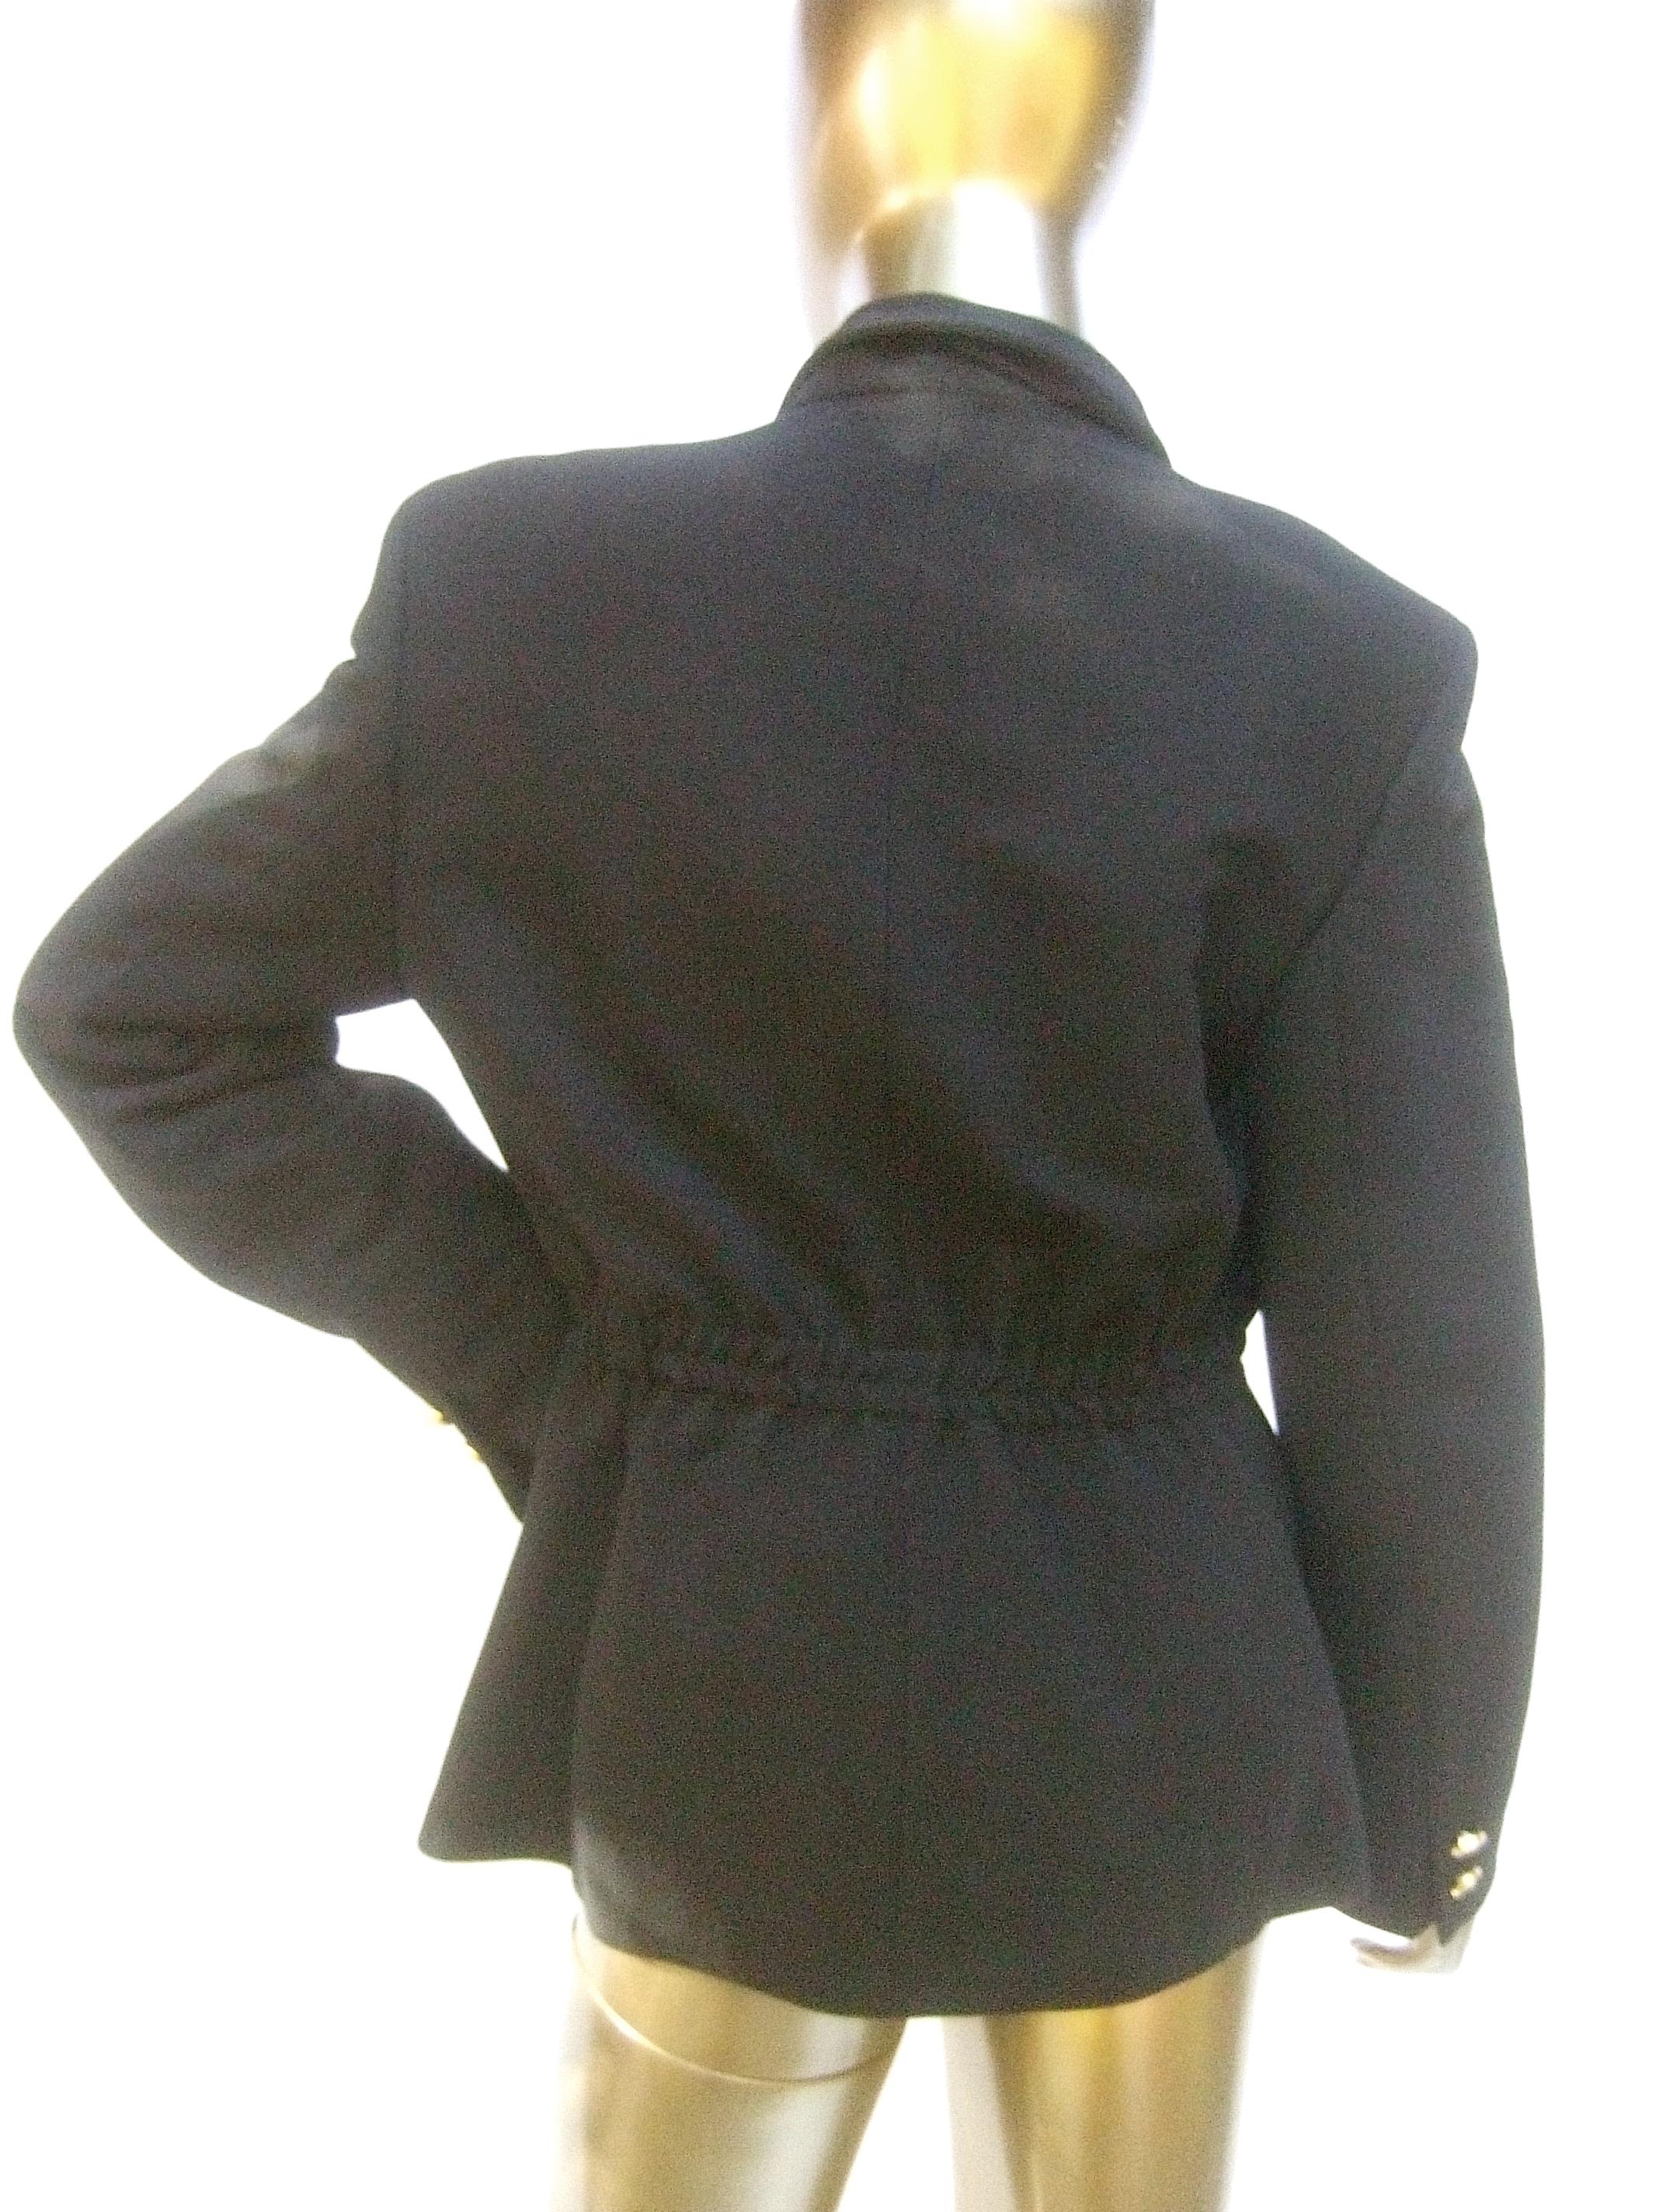 Versace Versus Black Wool Military Style Jacket Circa 1990s For Sale 4